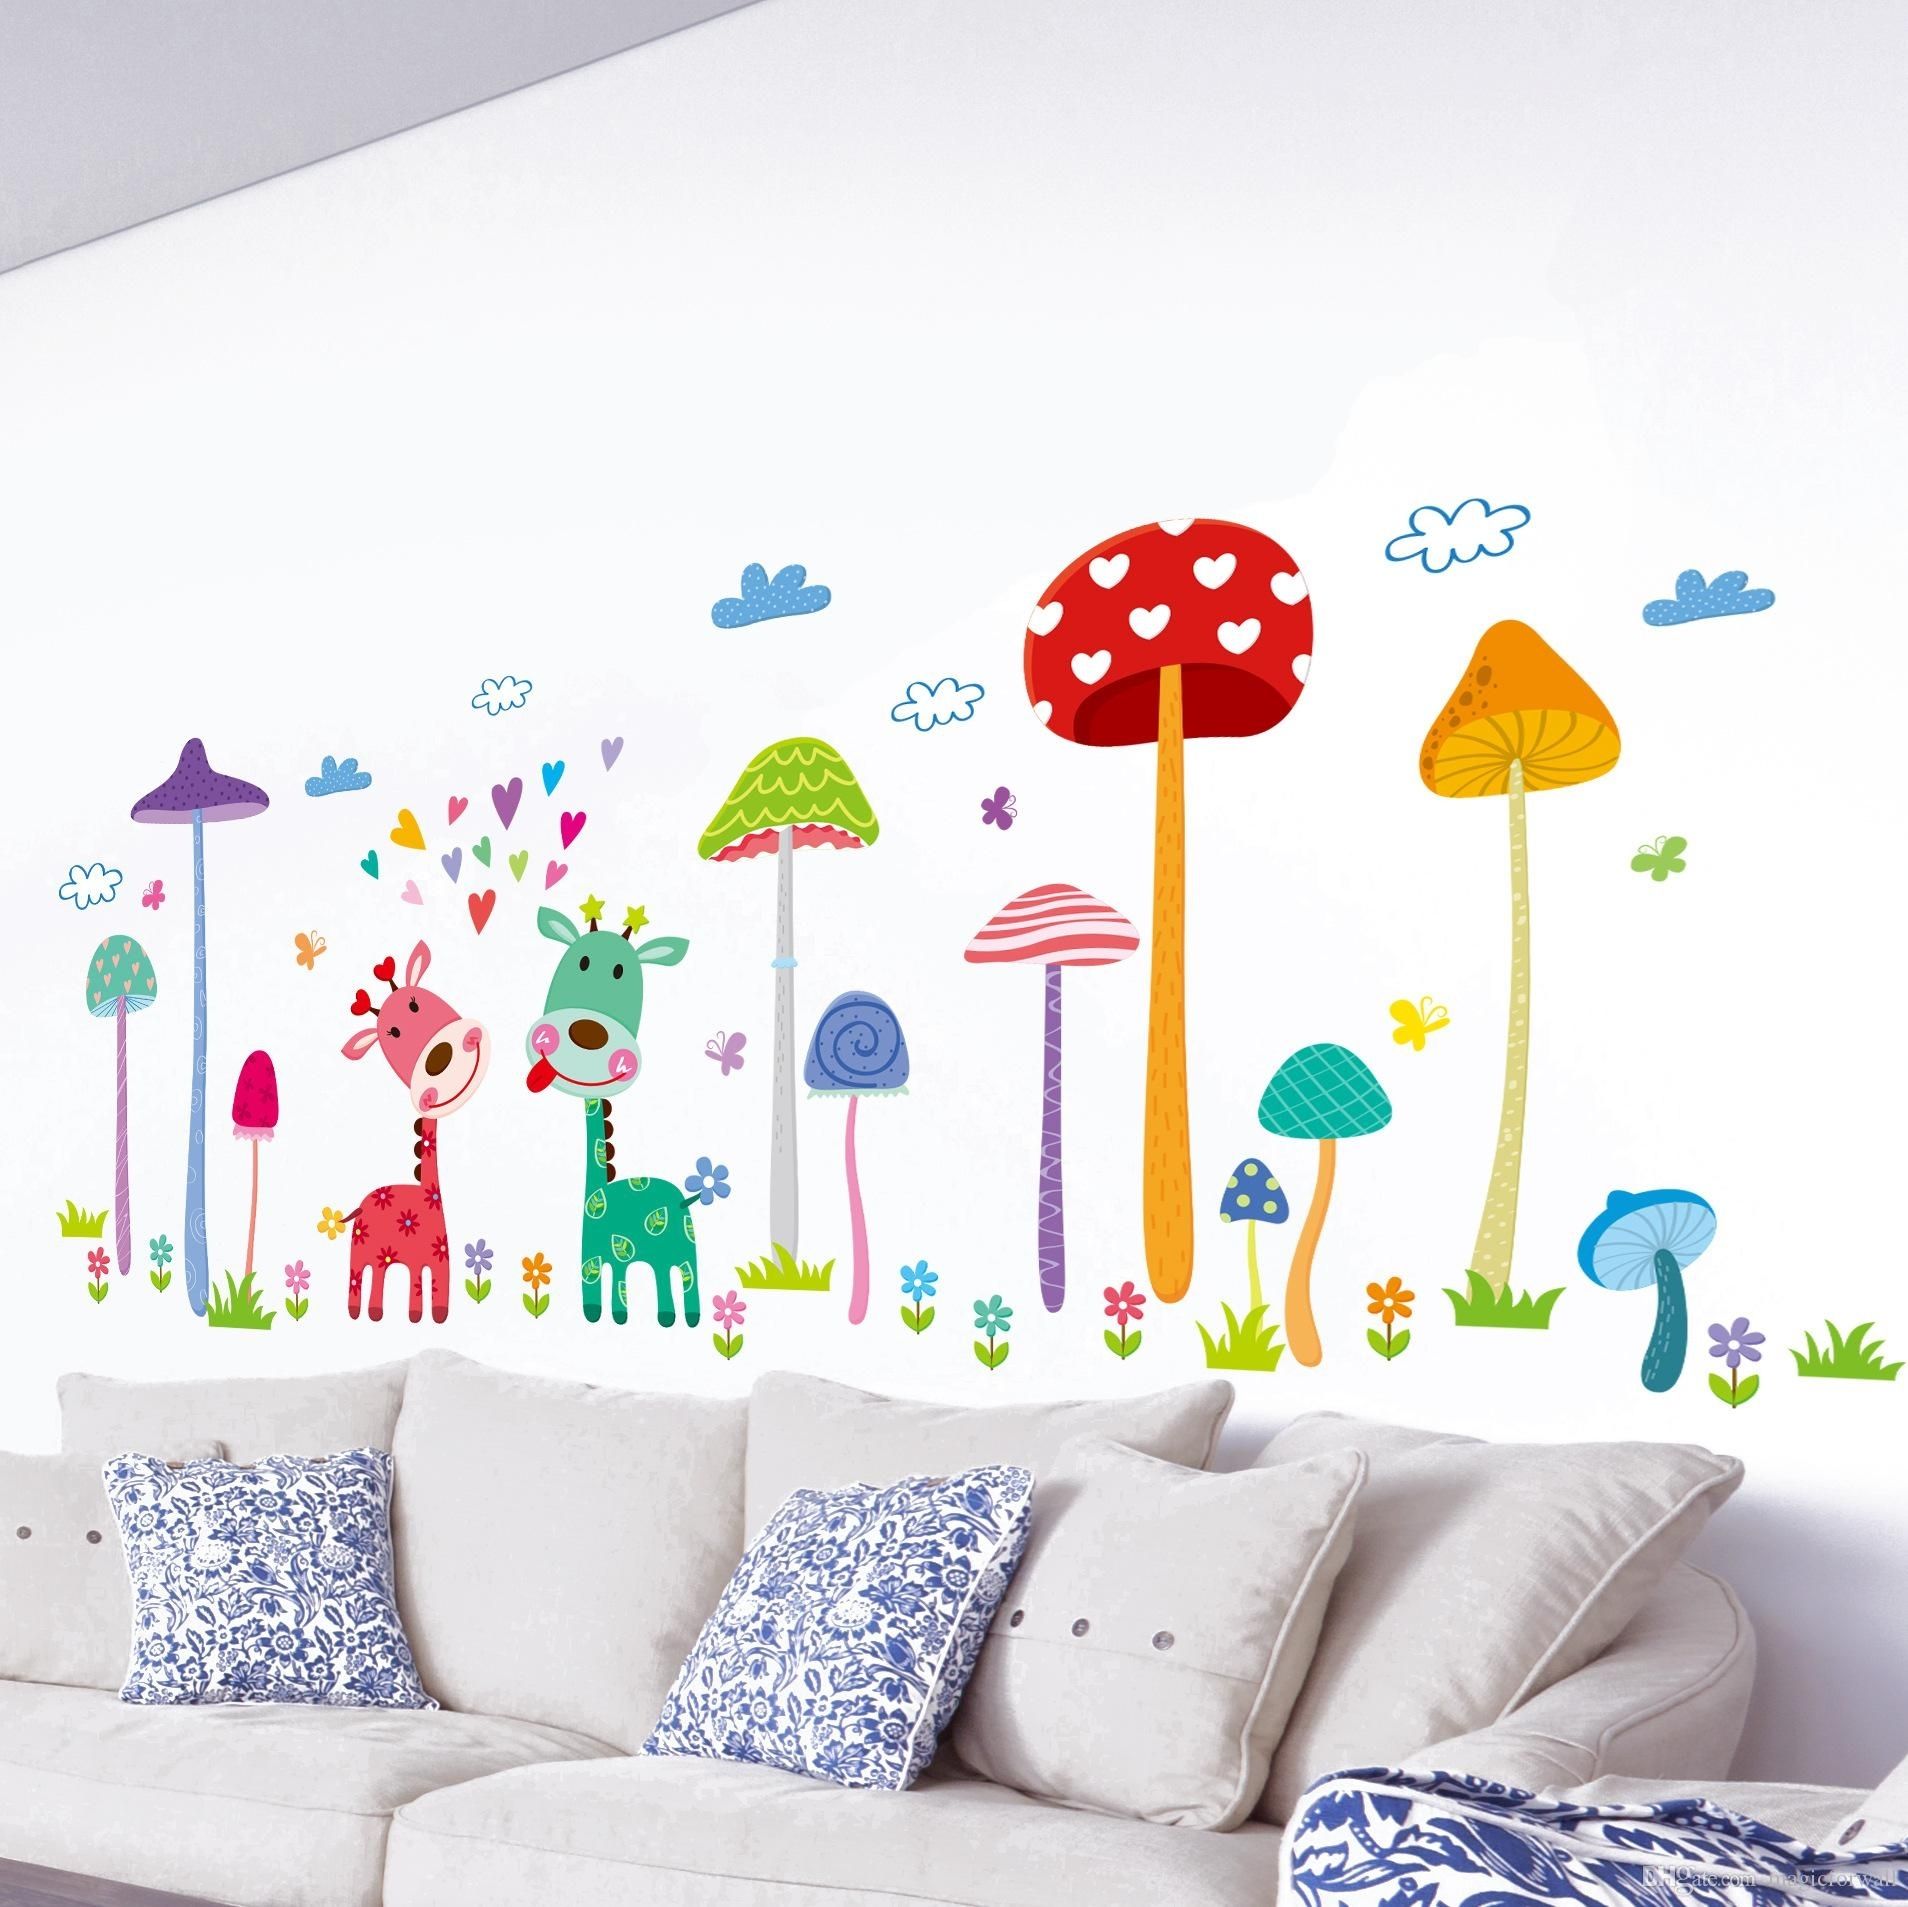 Forest Mushroom Deer Animals Home Wall Art Mural Decor Kids Babies Intended For Home Wall Art (Photo 15 of 20)